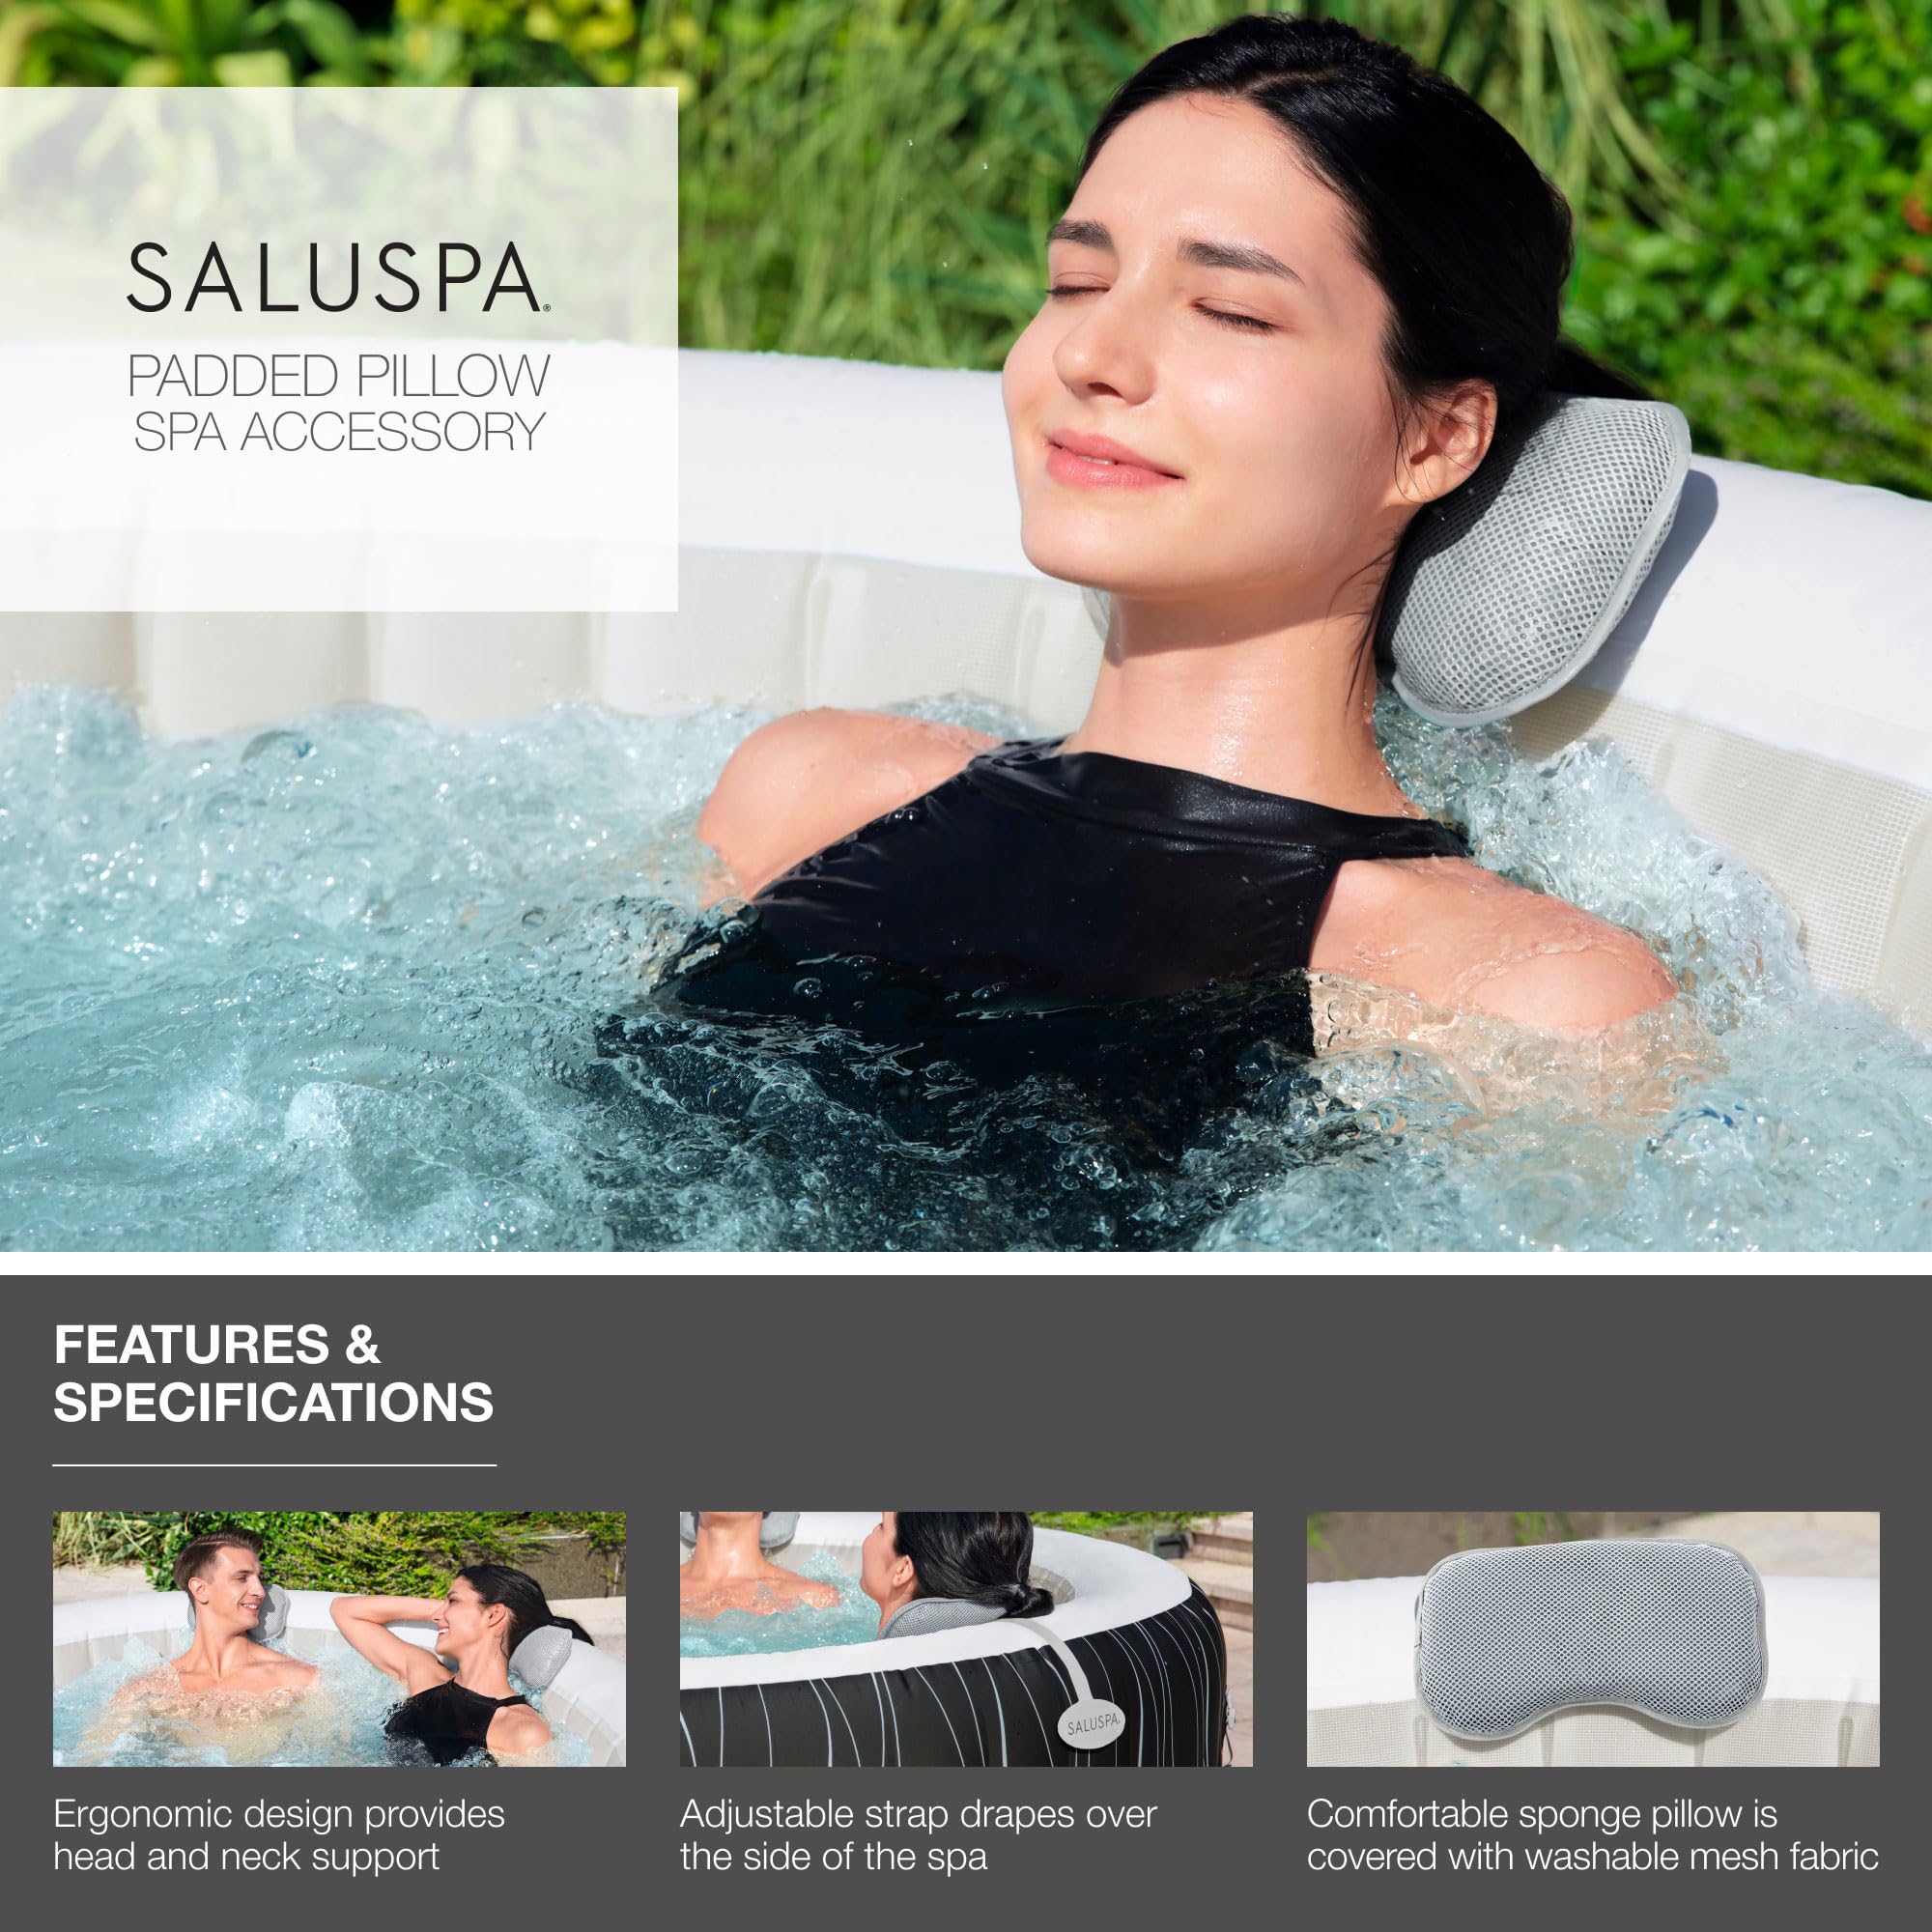 Bestway SaluSpa Milan AirJet Inflatable Hot Tub and 4-Pack of SaluSpa Underwater Non-Slip Spa Seat w/ 4 Adjustable Legs and 2 Padded Headrest Pillows